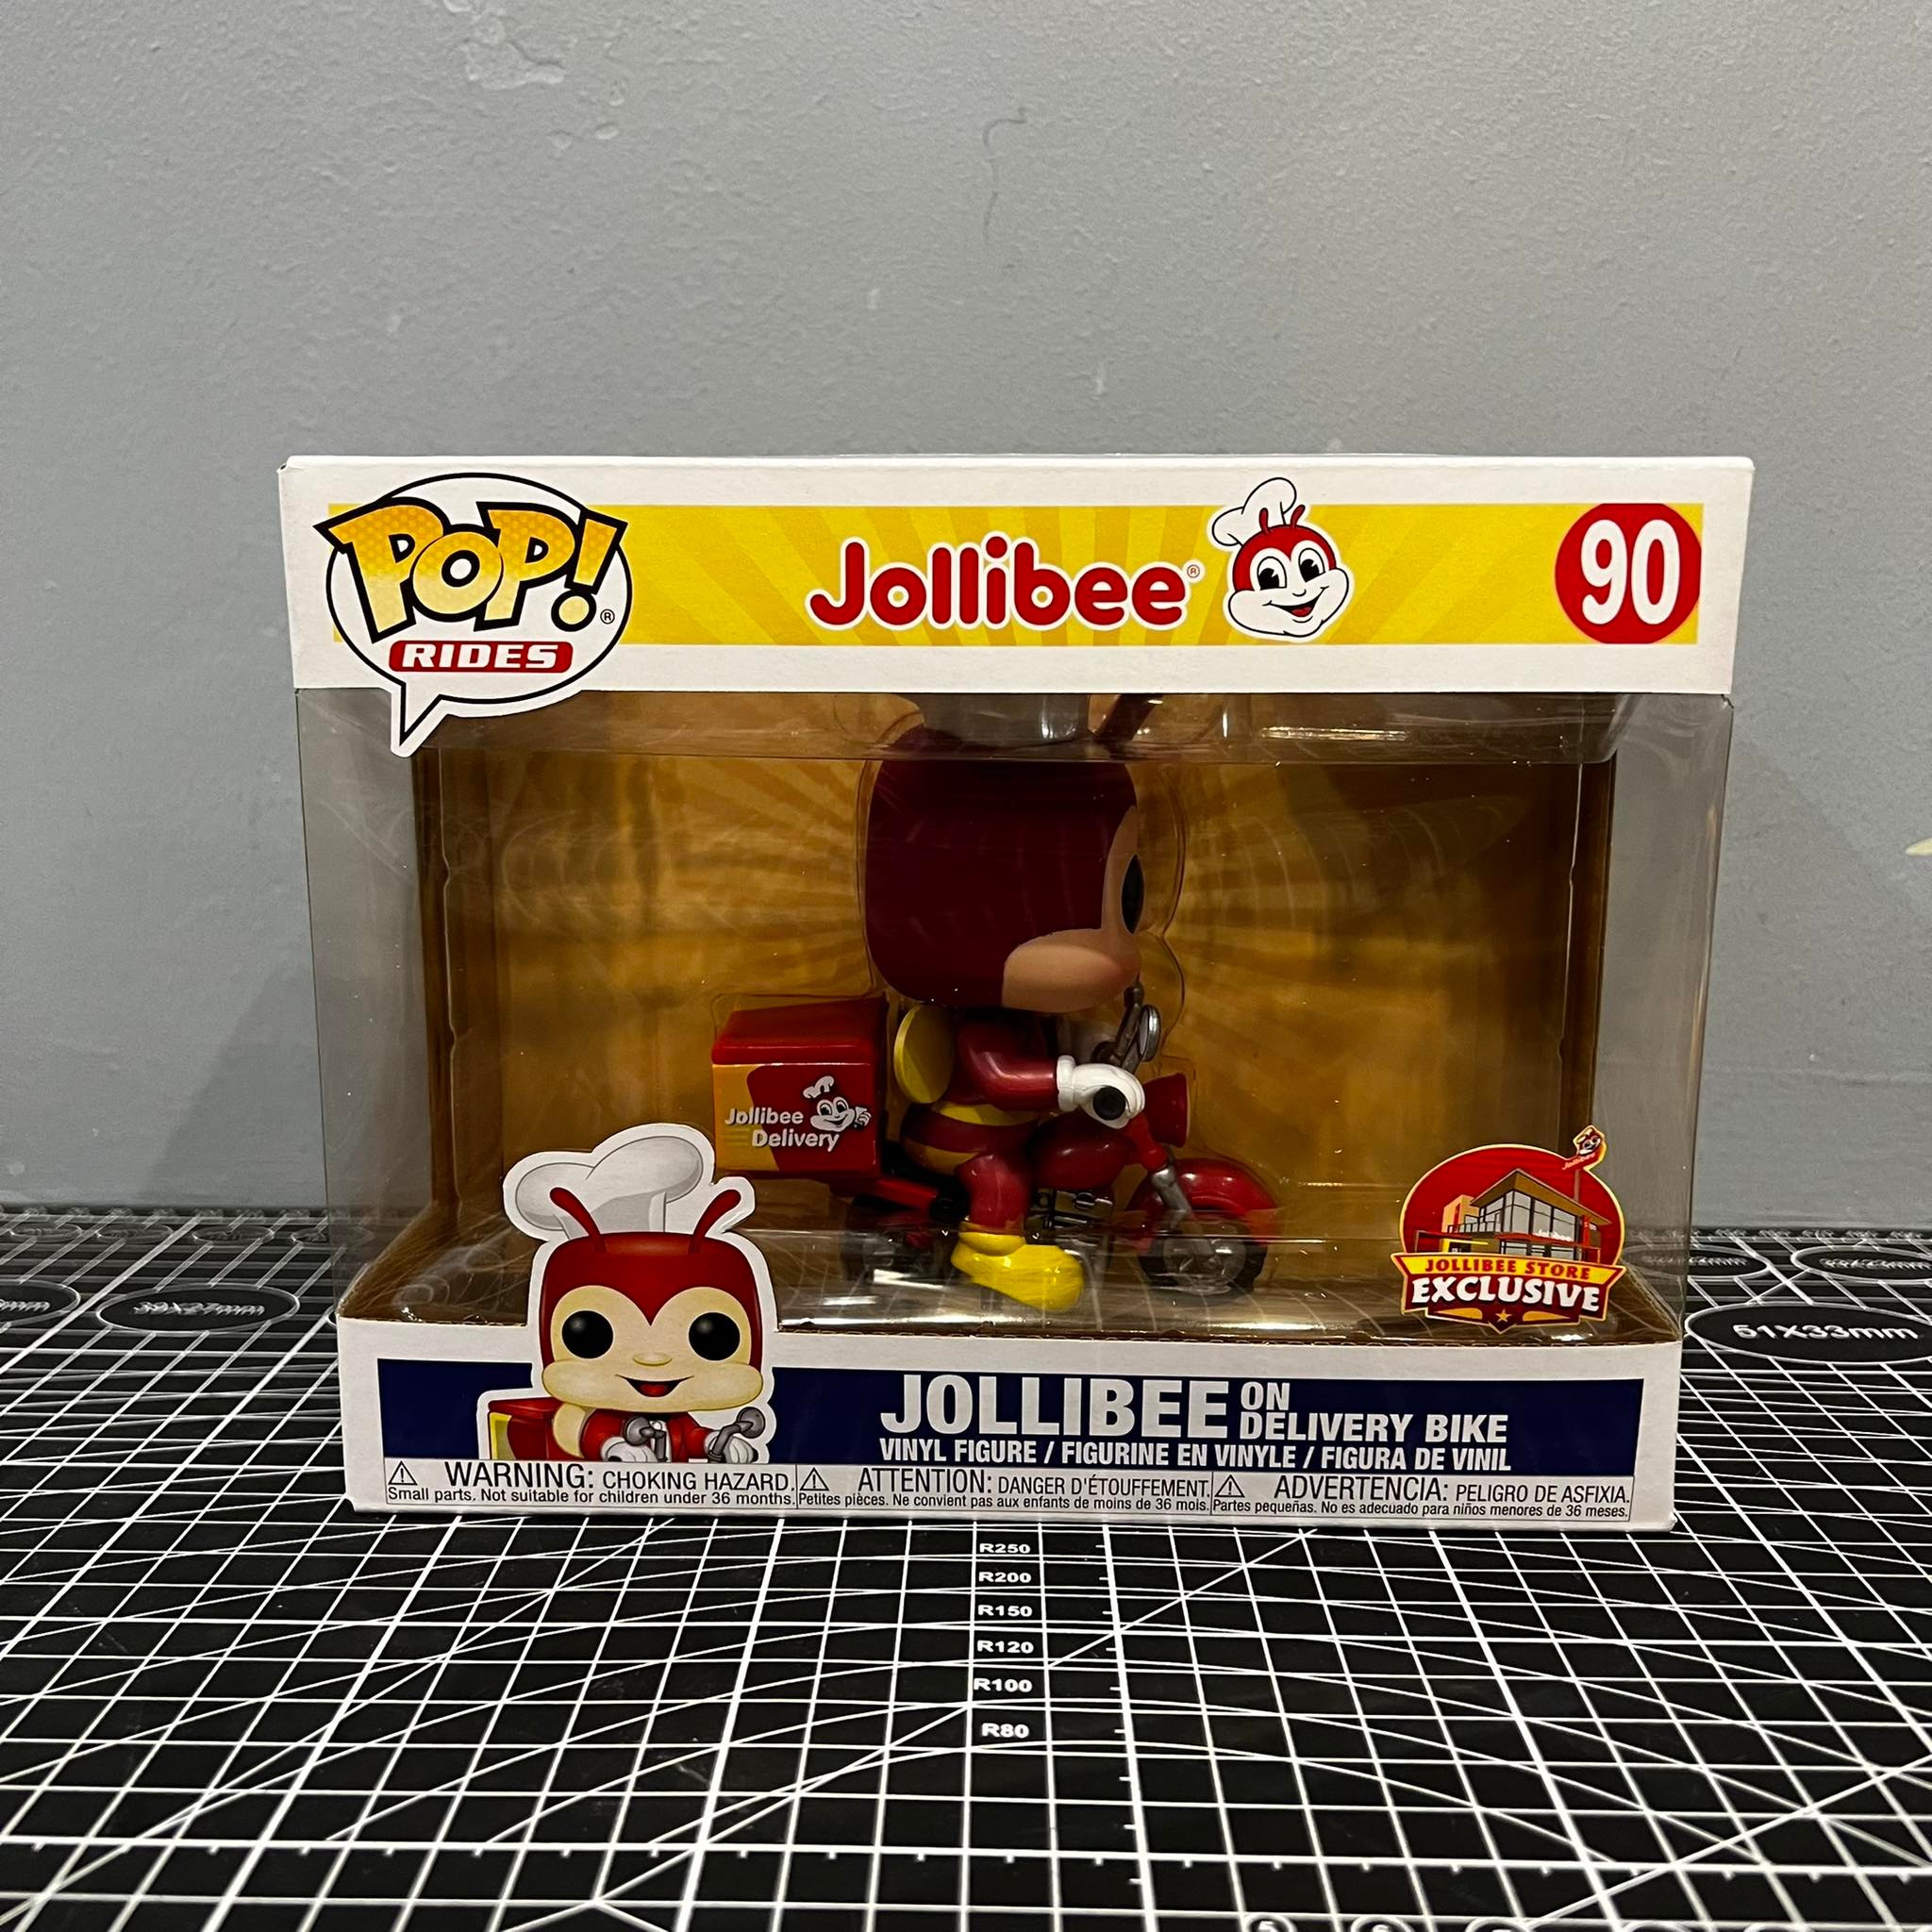 Jollibee Fun Store Jollibee In Delivery Bike Collect Figure Toy New In Package 